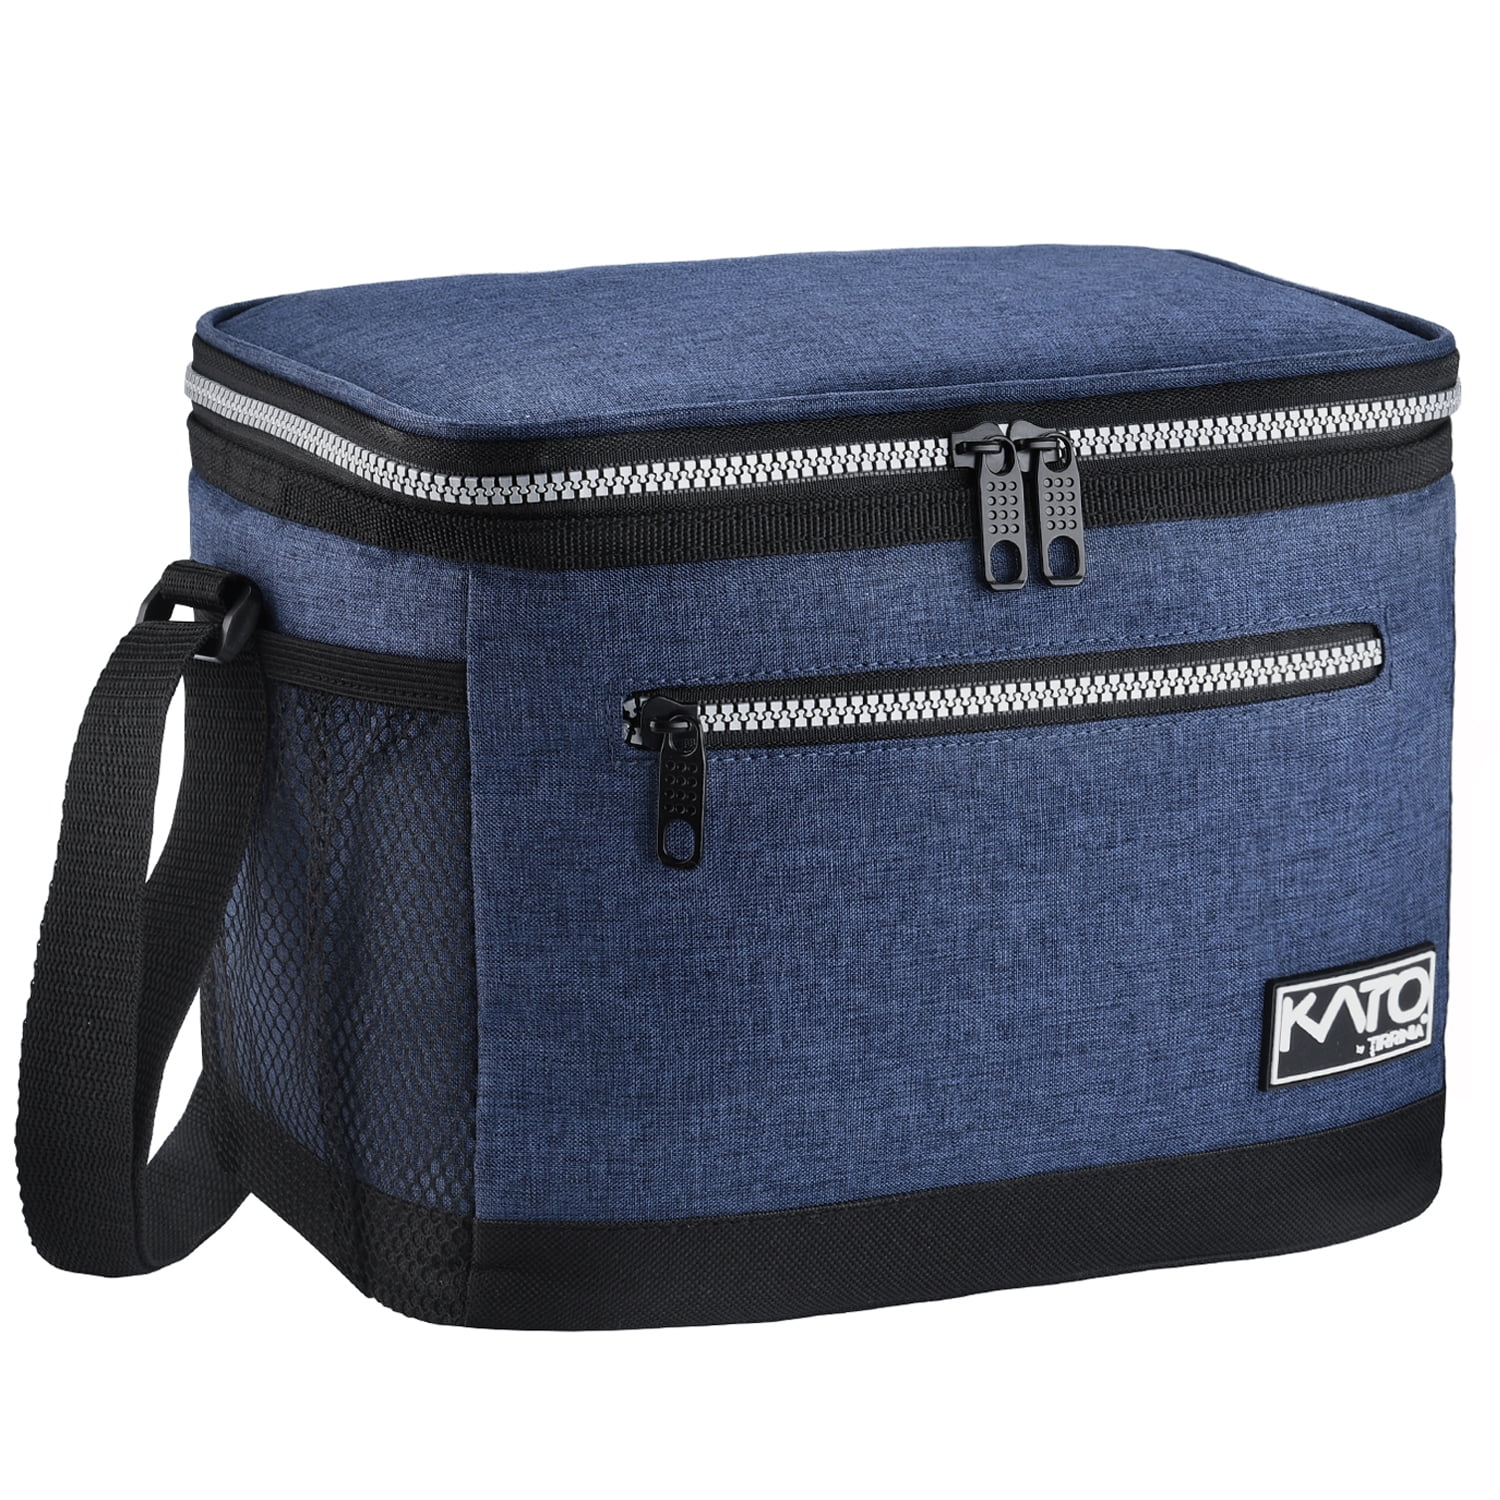 Large Insulated Lunch Box For Men Lunchbox with 2 Reusable Insulated Lunch Bag 